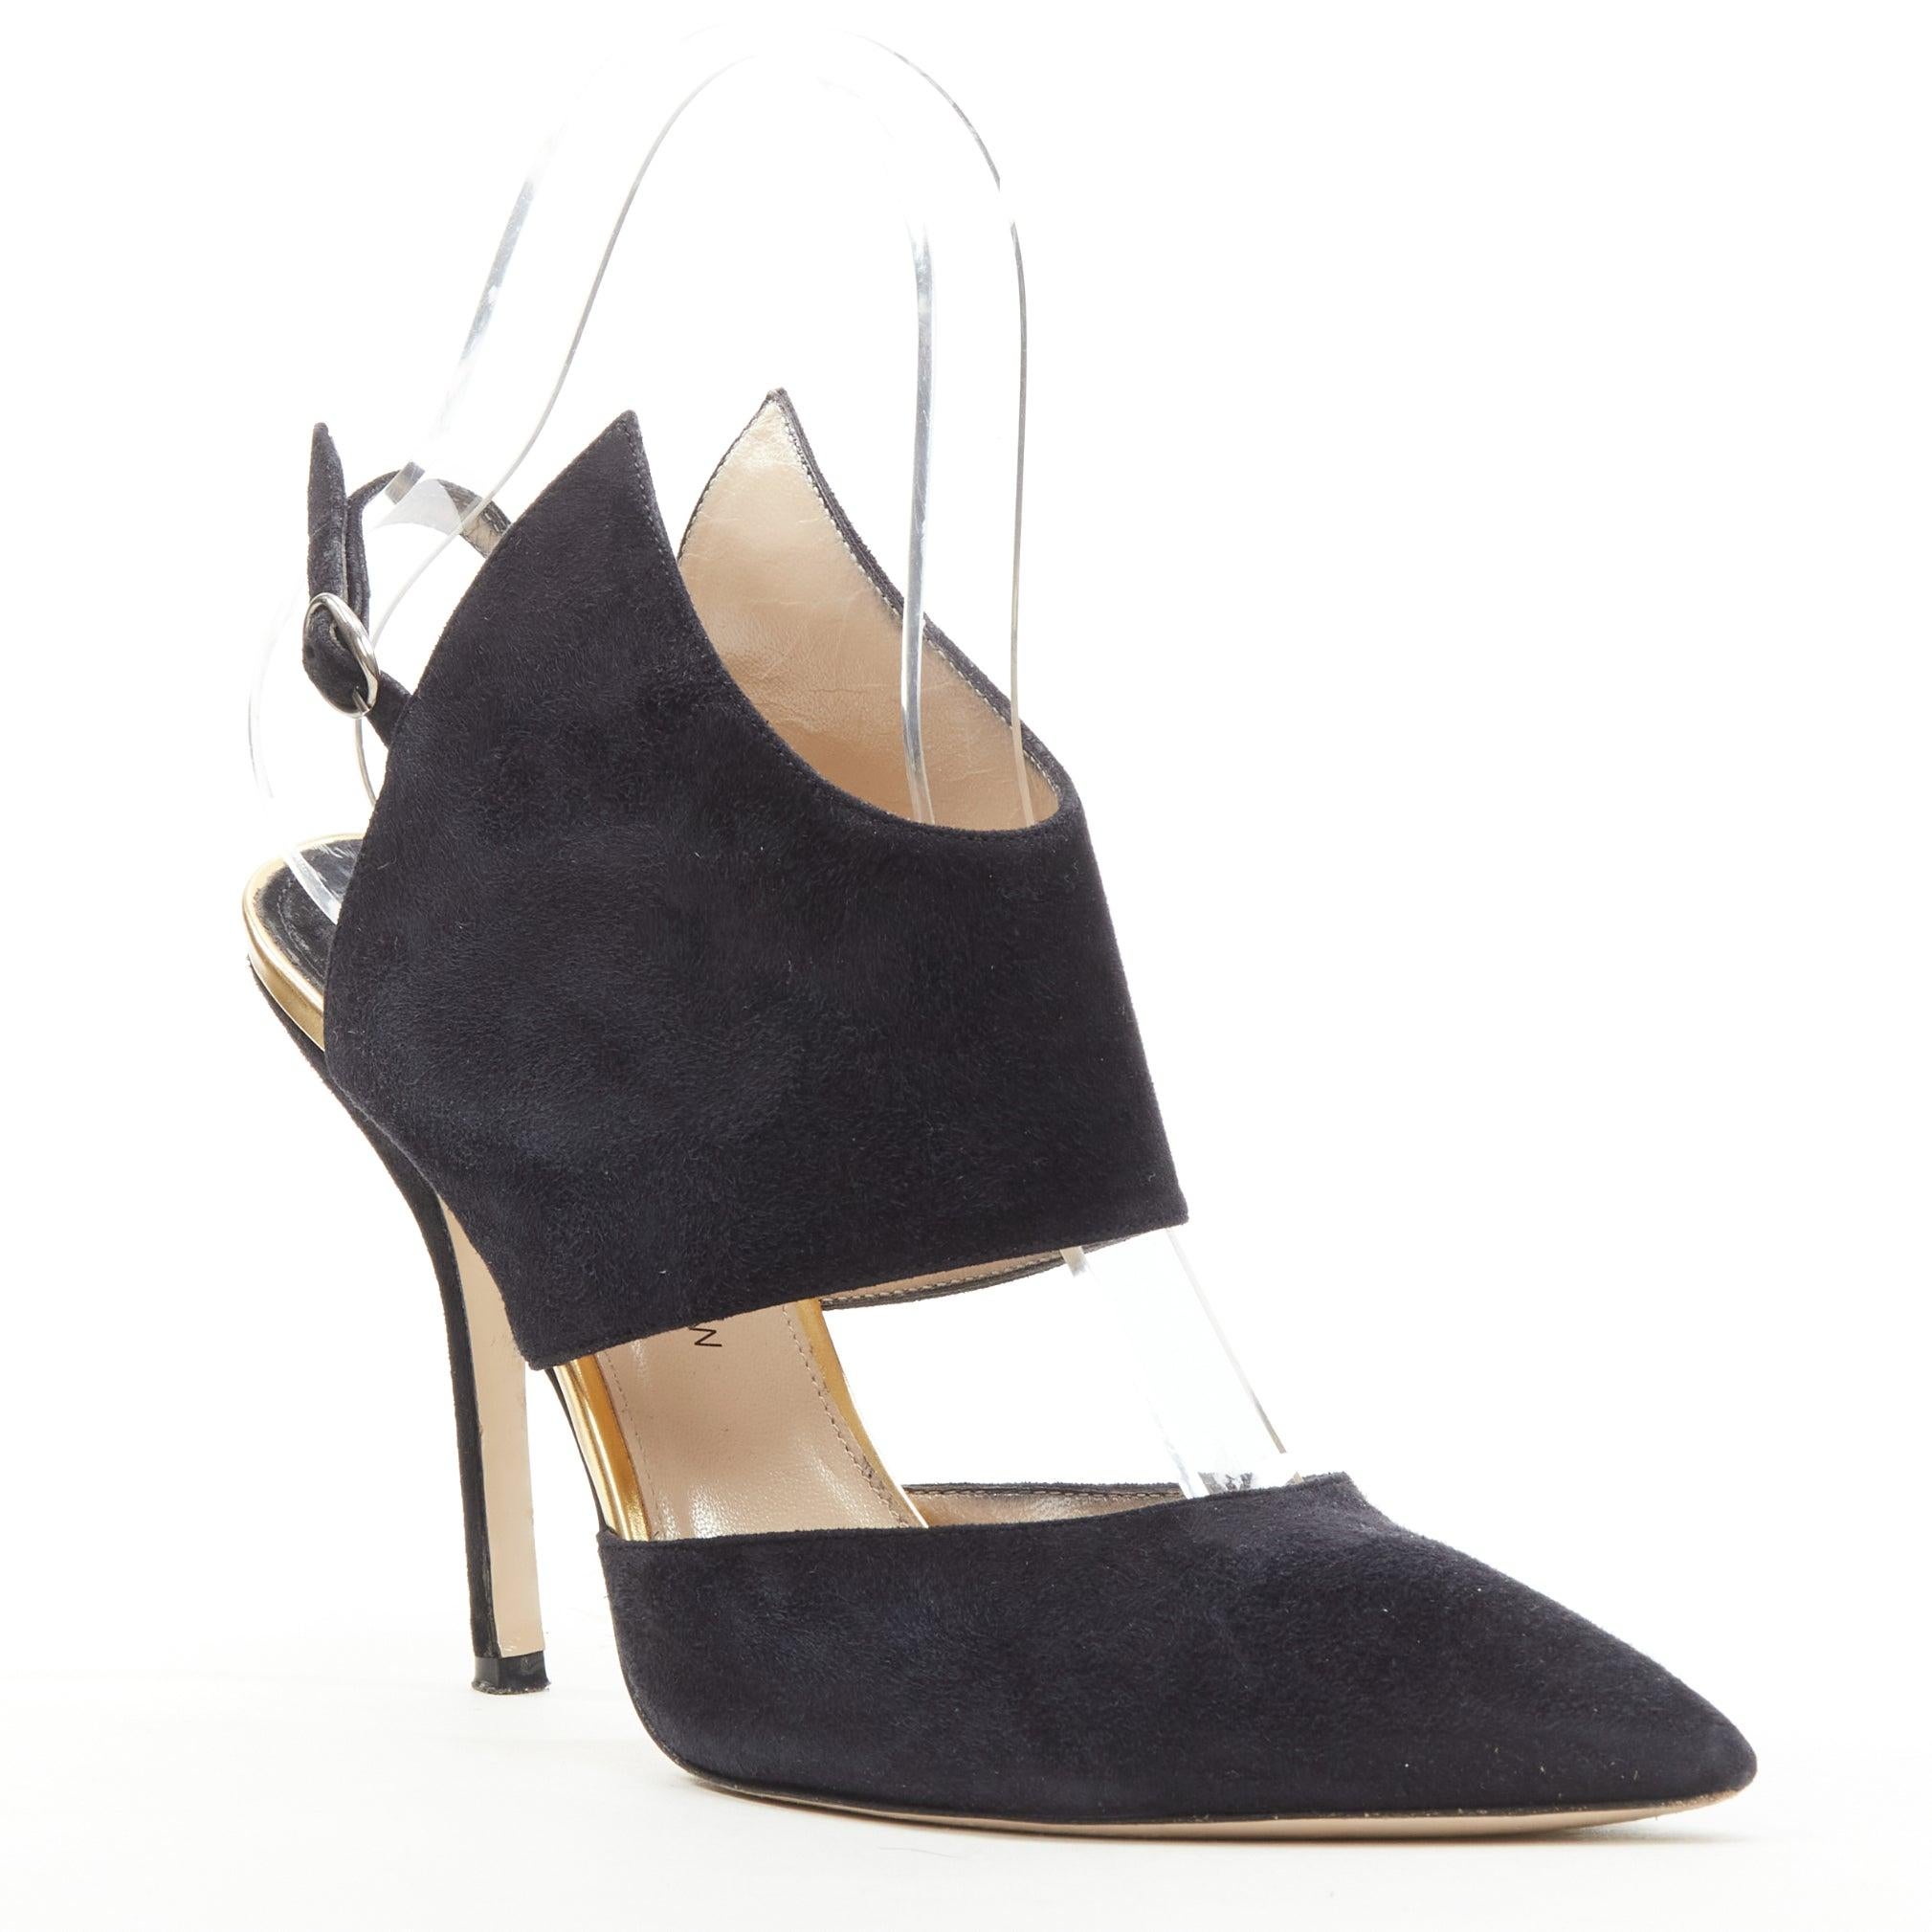 PAUL ANDREW black suede pointed winged dorsay pump EU38.5
Reference: KEDG/A00222
Brand: Paul Andrew
Designer: Paul Andrew
Material: Suede
Color: Black
Pattern: Solid
Closure: Slingback
Lining: Leather
Extra Details: Buckle slingback strap
Made in: